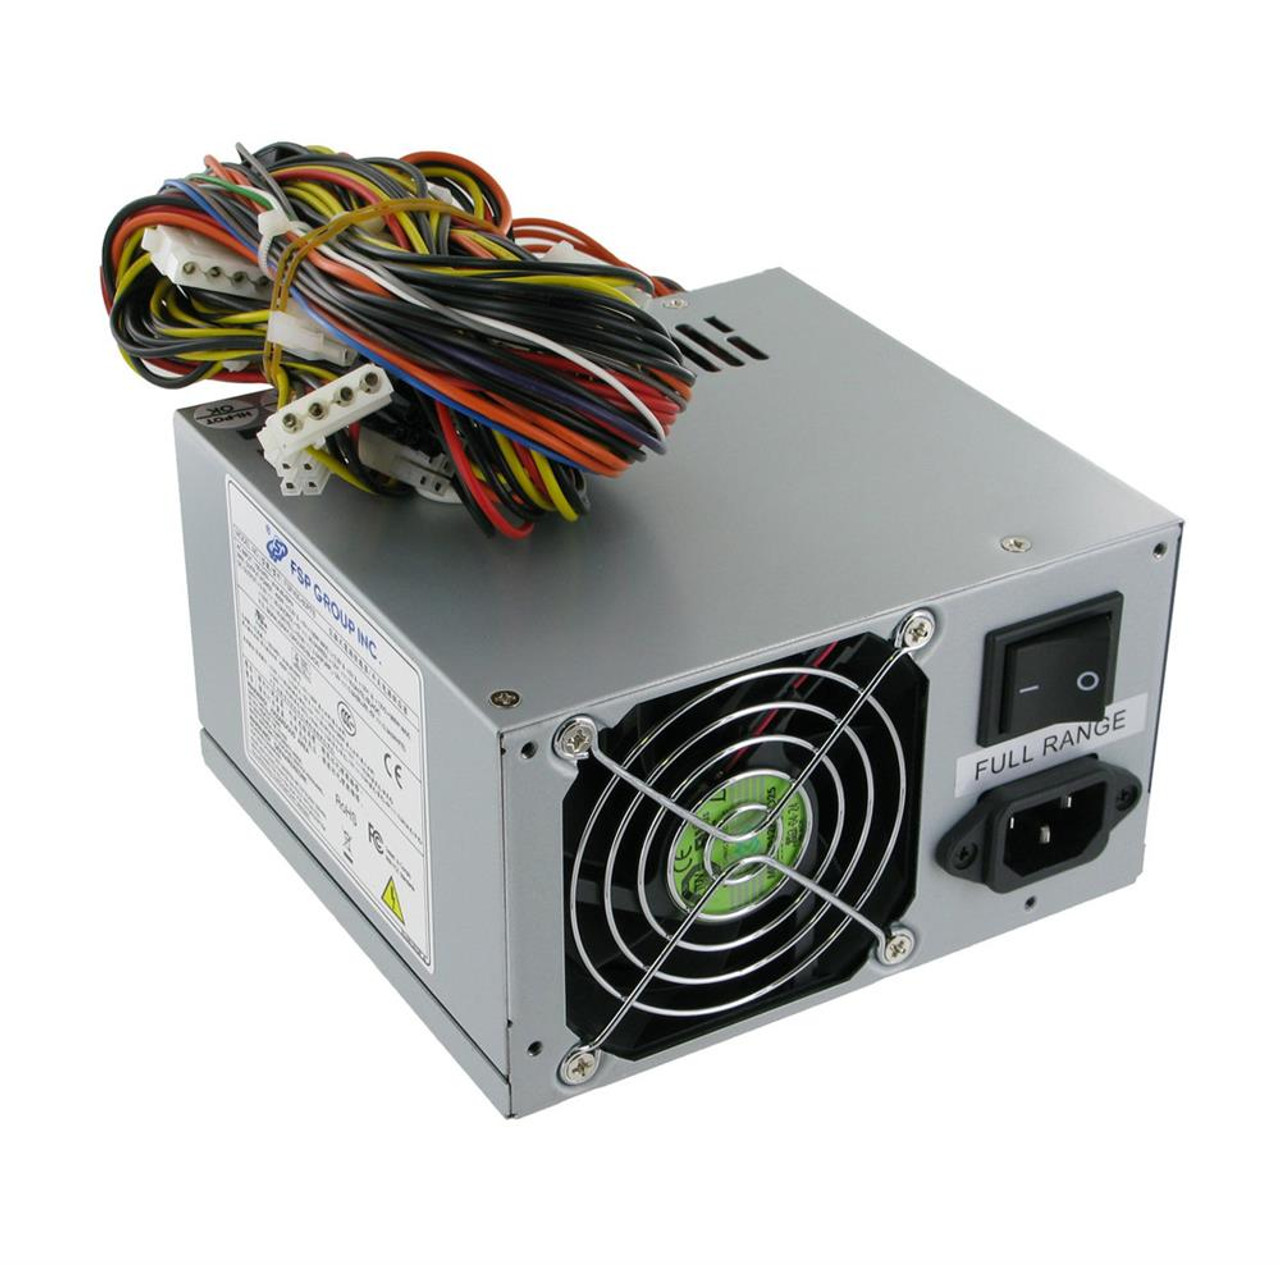 FSP400-60PFB for FSP/Industrial Level of Switching Power Supply